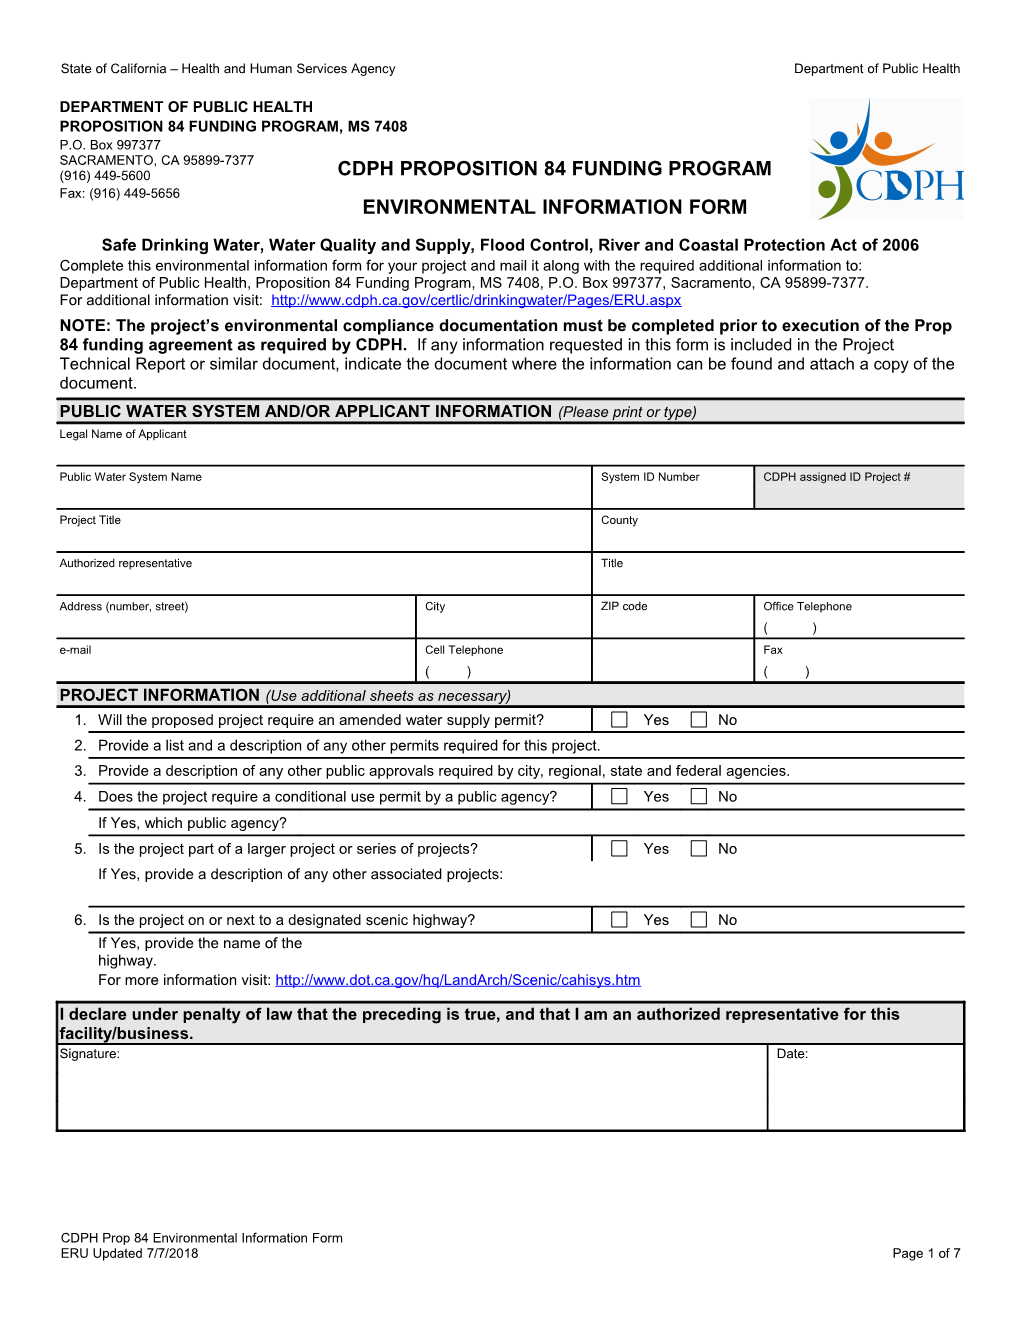 Proposition 84 Environmental Information Form